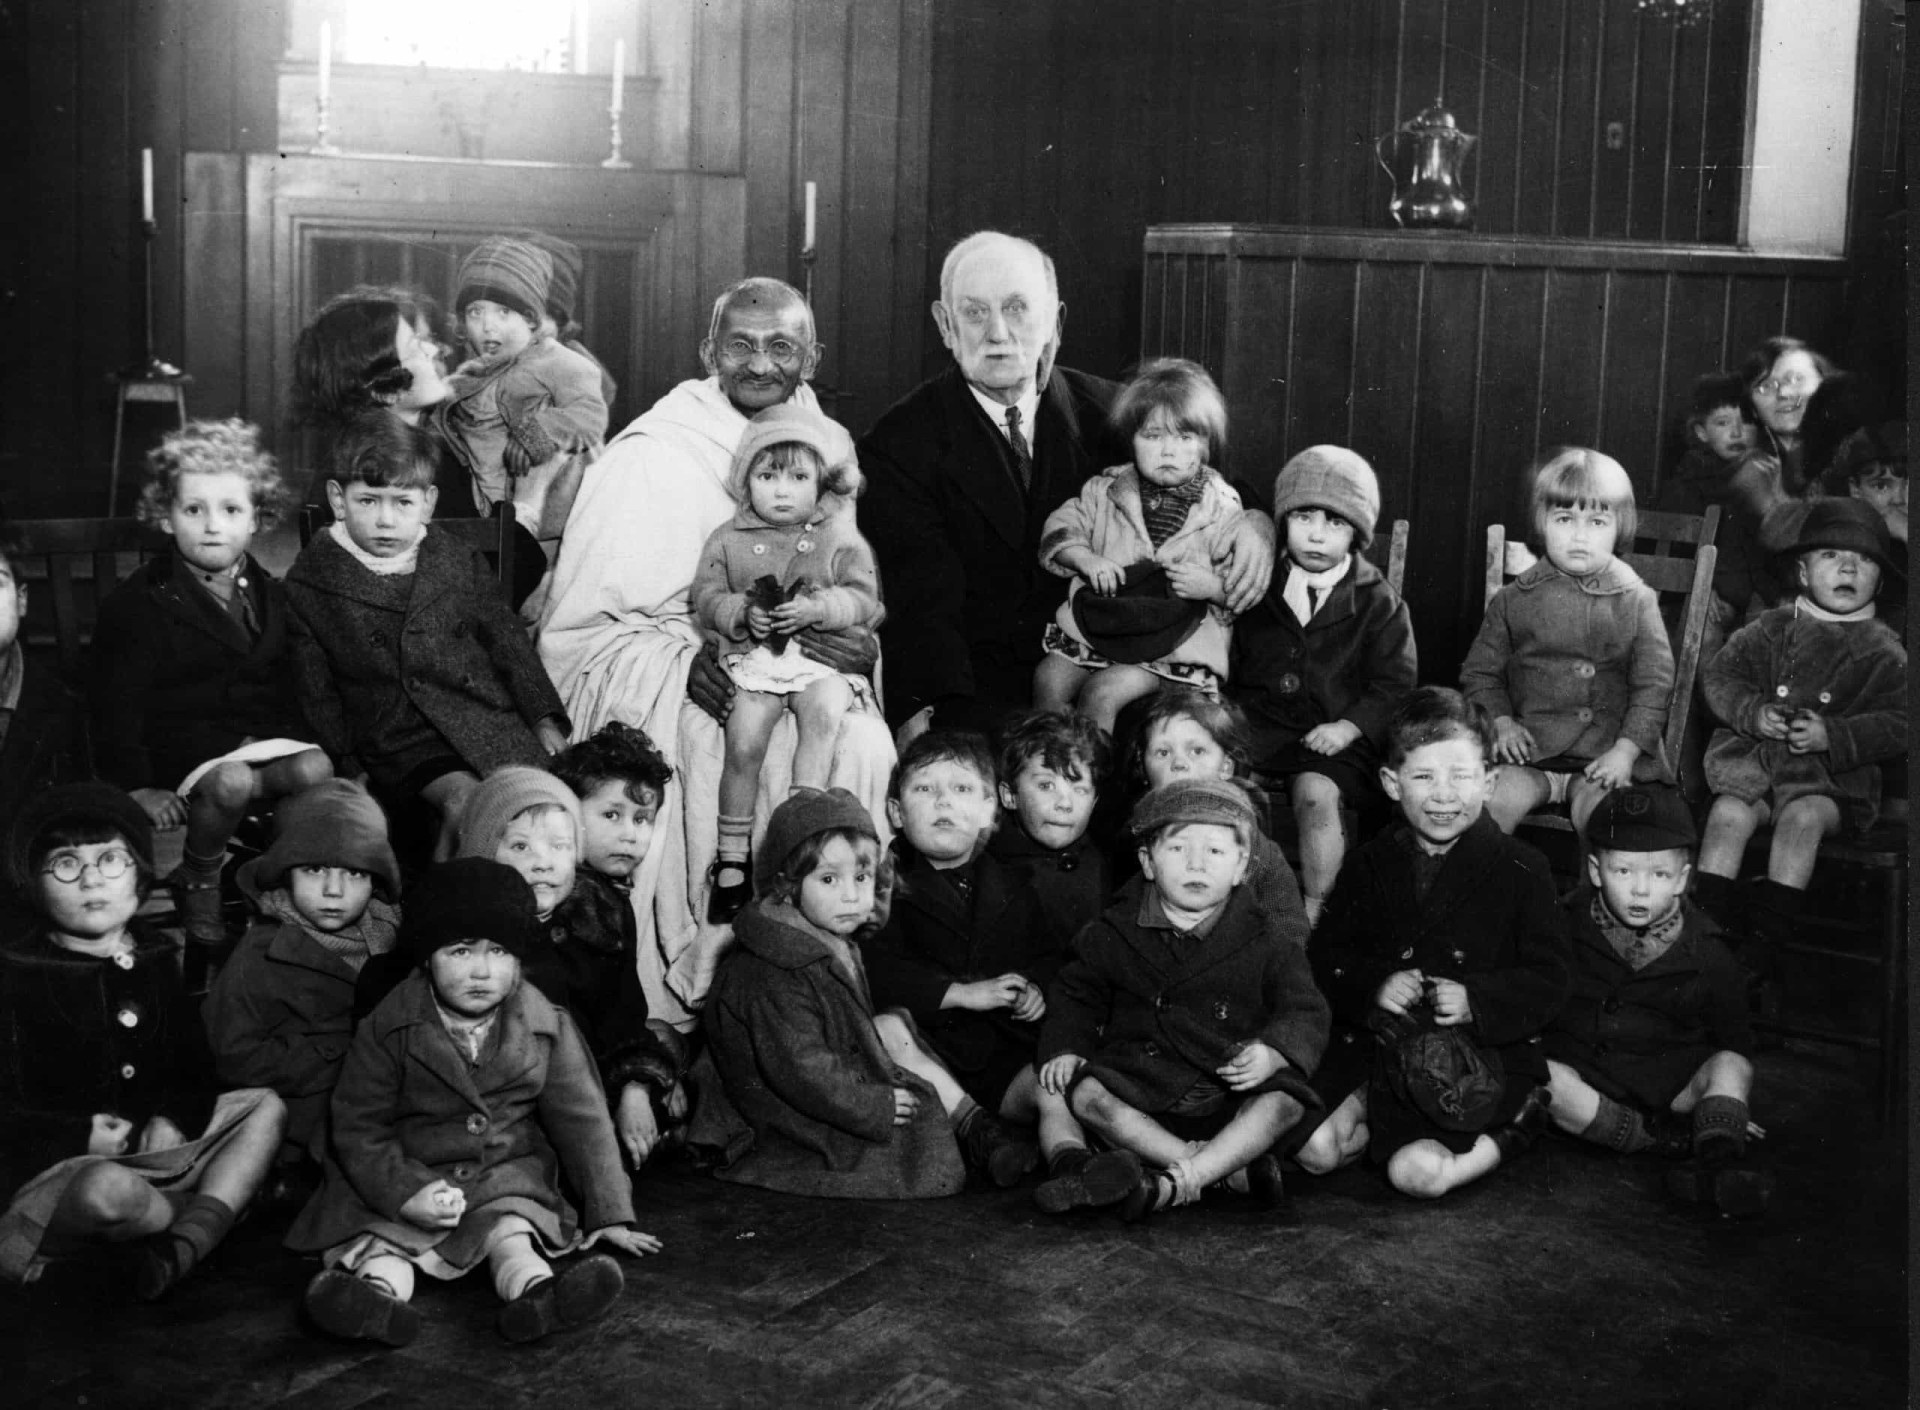 <p>Gandhi eschewed the comforts of a hotel stay offered by the government and instead stayed at Kingsley Hall with Labour Party member and social reformer George Lansbury. Both are pictured meeting local children. </p><p>You may also like:<a href="https://www.starsinsider.com/n/459036?utm_source=msn.com&utm_medium=display&utm_campaign=referral_description&utm_content=447666v5en-us"> Movie sequels that cut out main characters</a></p>